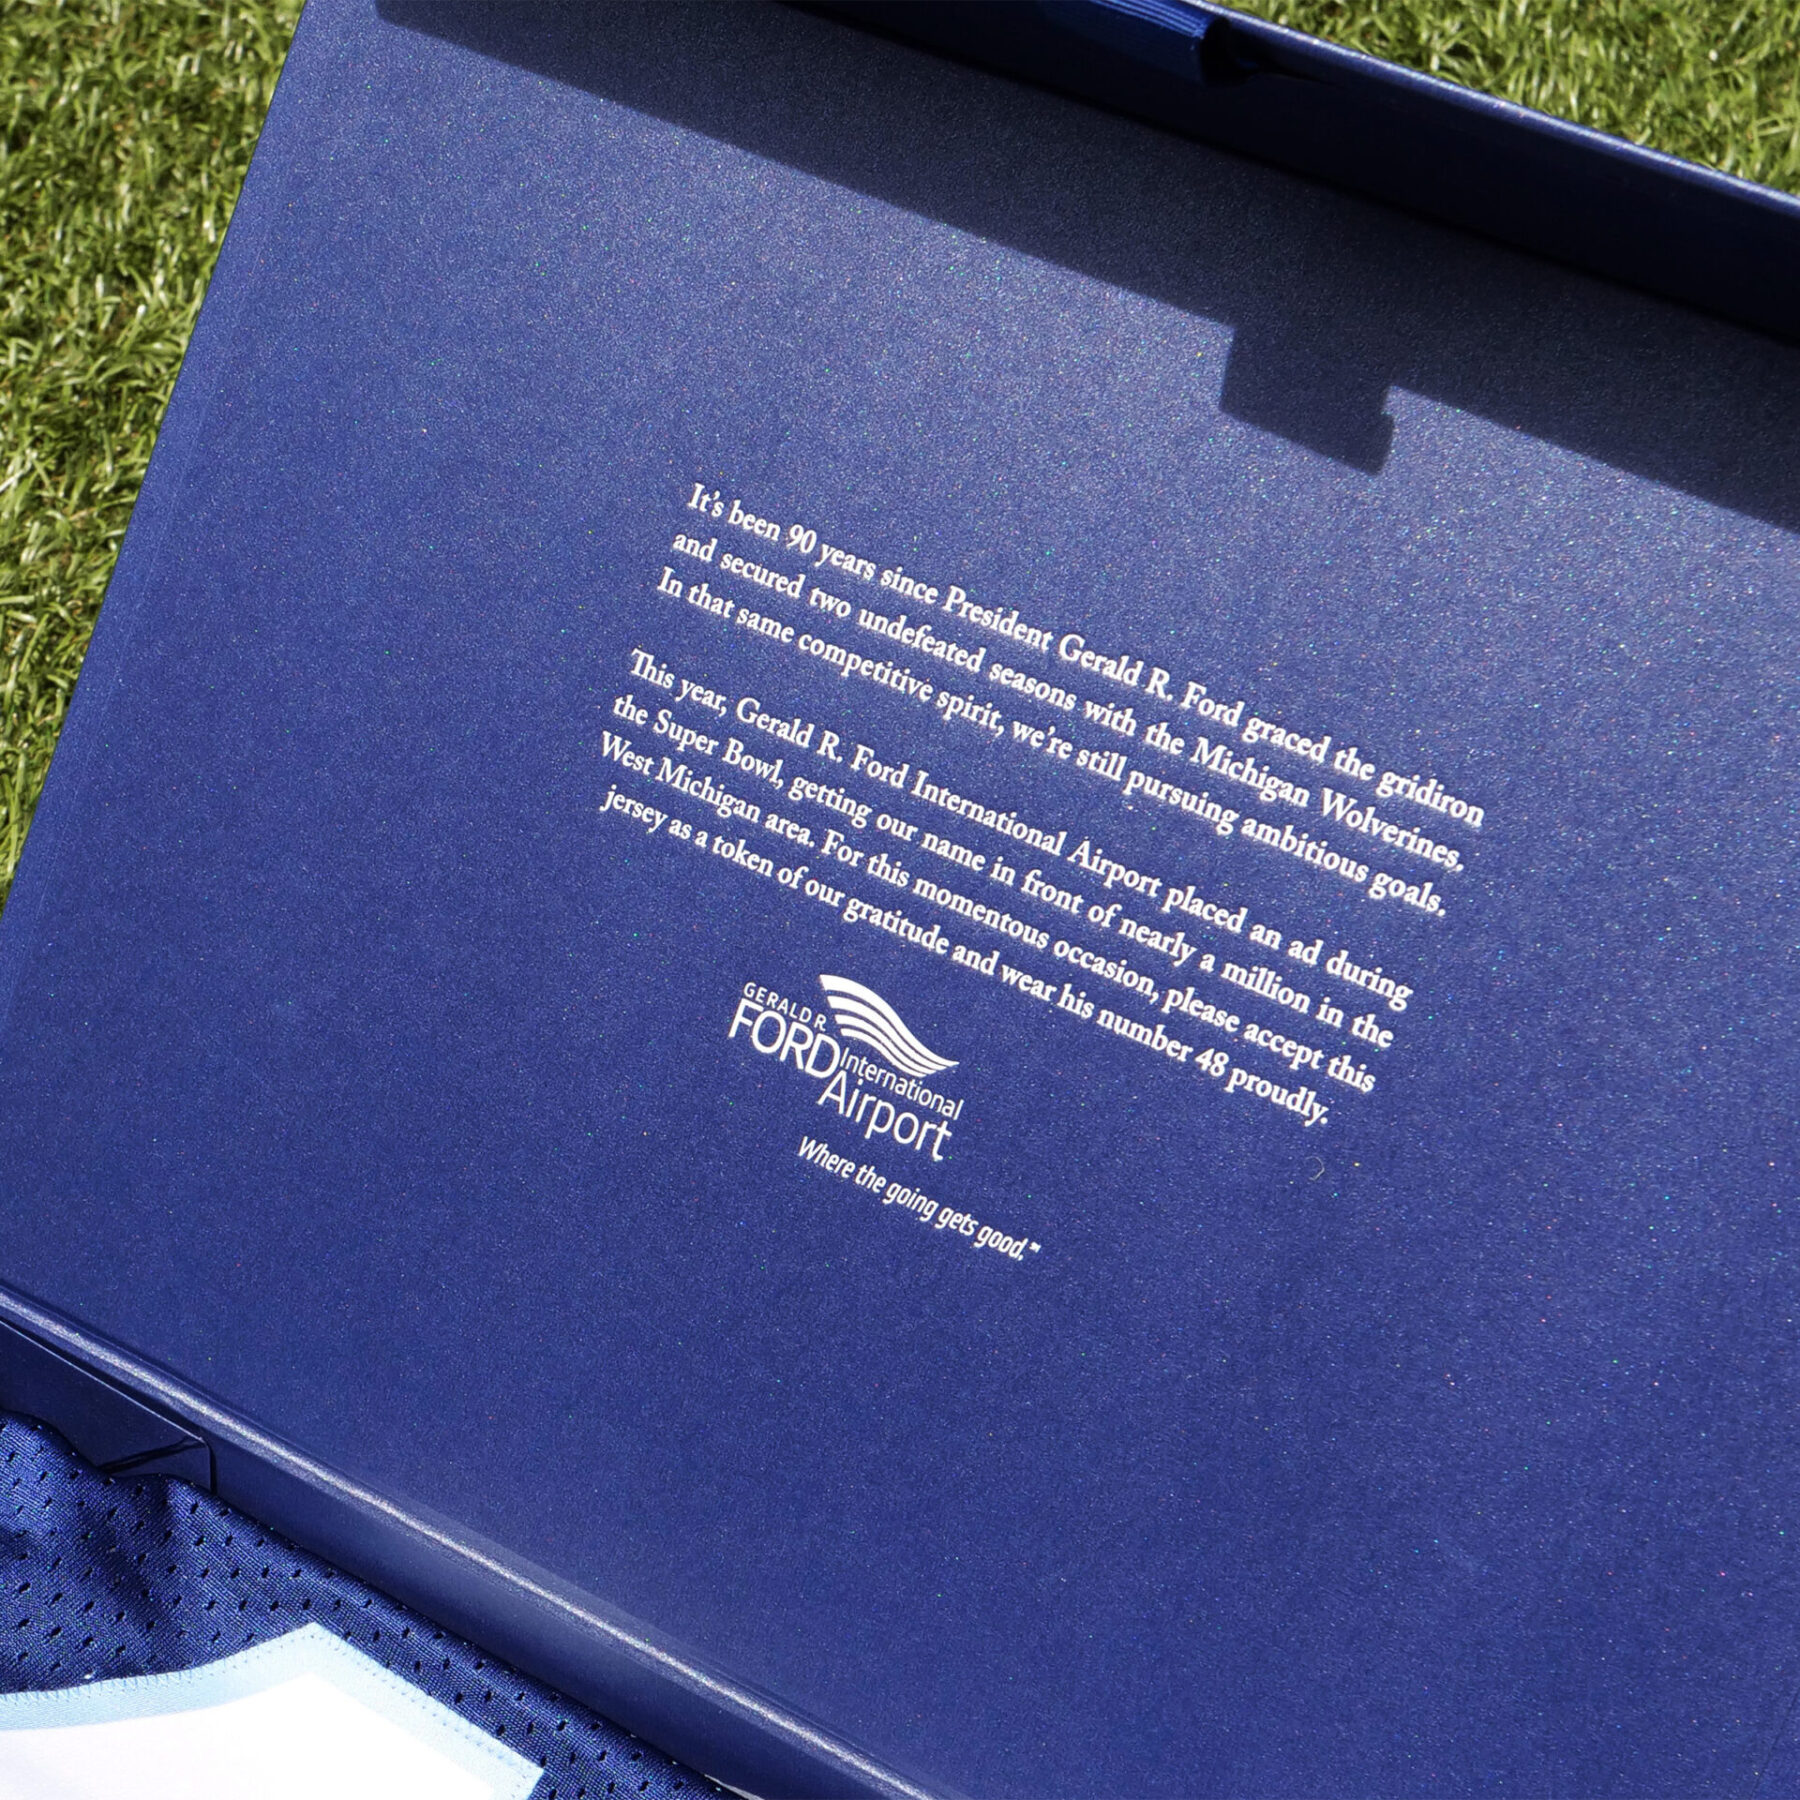 Packaging for Gerald R Ford jersey